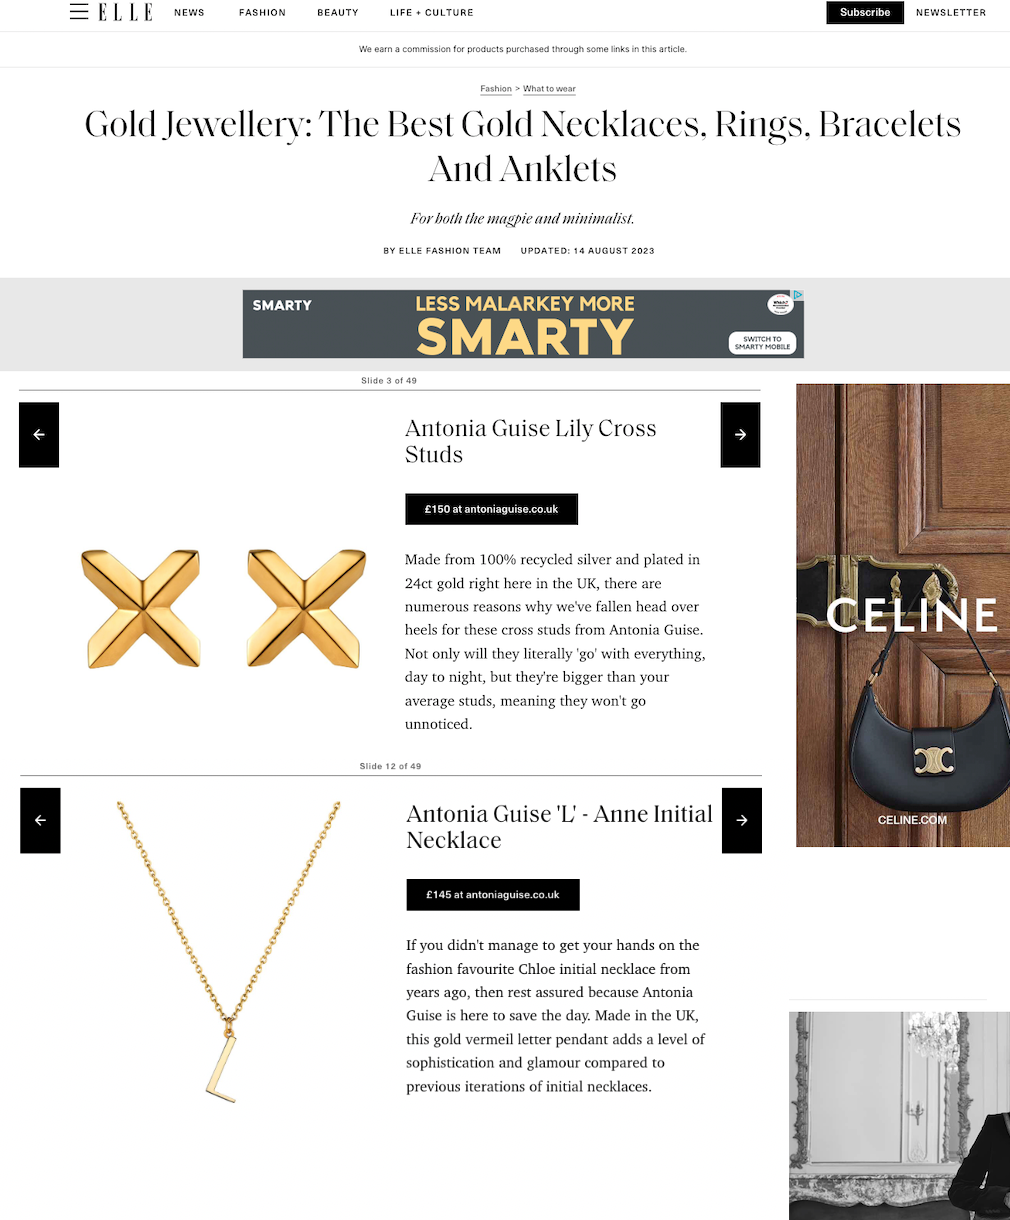 Screenshot of Antonia Guise inclusion in ELLE online article on the best gold jewellery, featuring our lily cross stud and Anne Initial Necklace